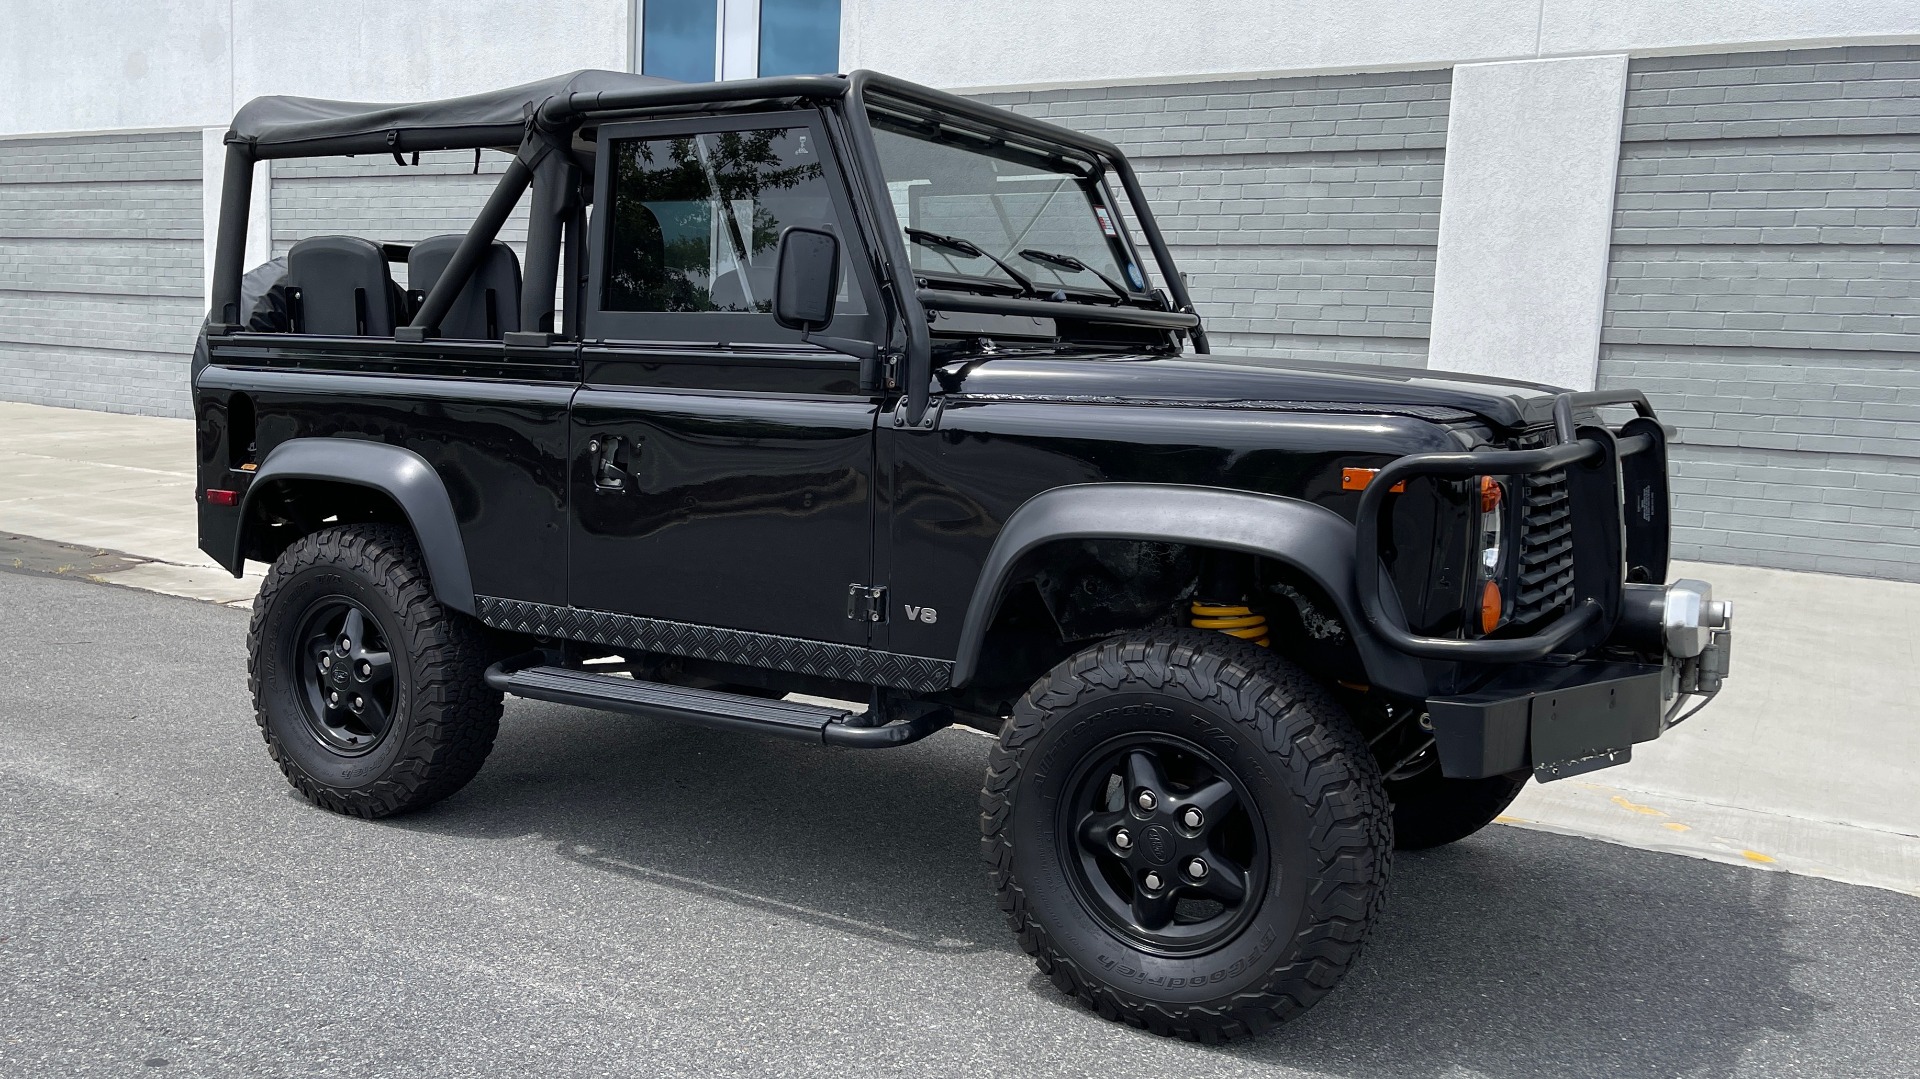 Used 1995 Land Rover DEFENDER 90 4x4 / 3.9L V8 / SOFT-TOP / 5-SPD MANUAL / RUNS GREAT for sale Sold at Formula Imports in Charlotte NC 28227 8